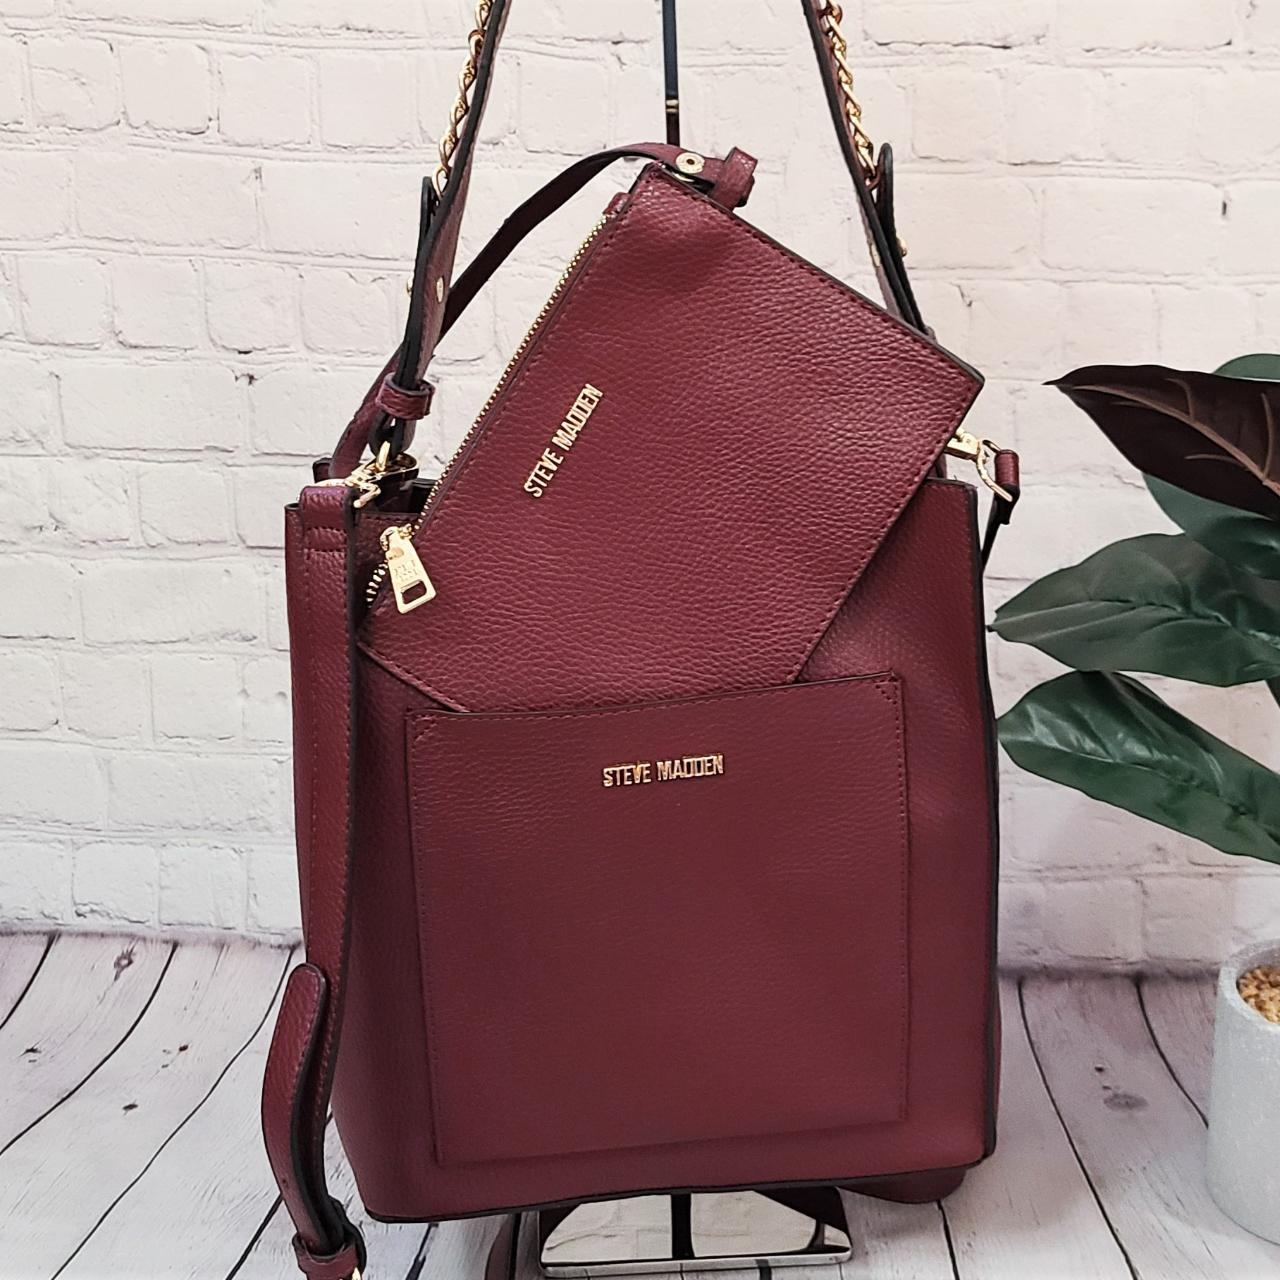 10 of the Best Steve Madden Bags Available Now